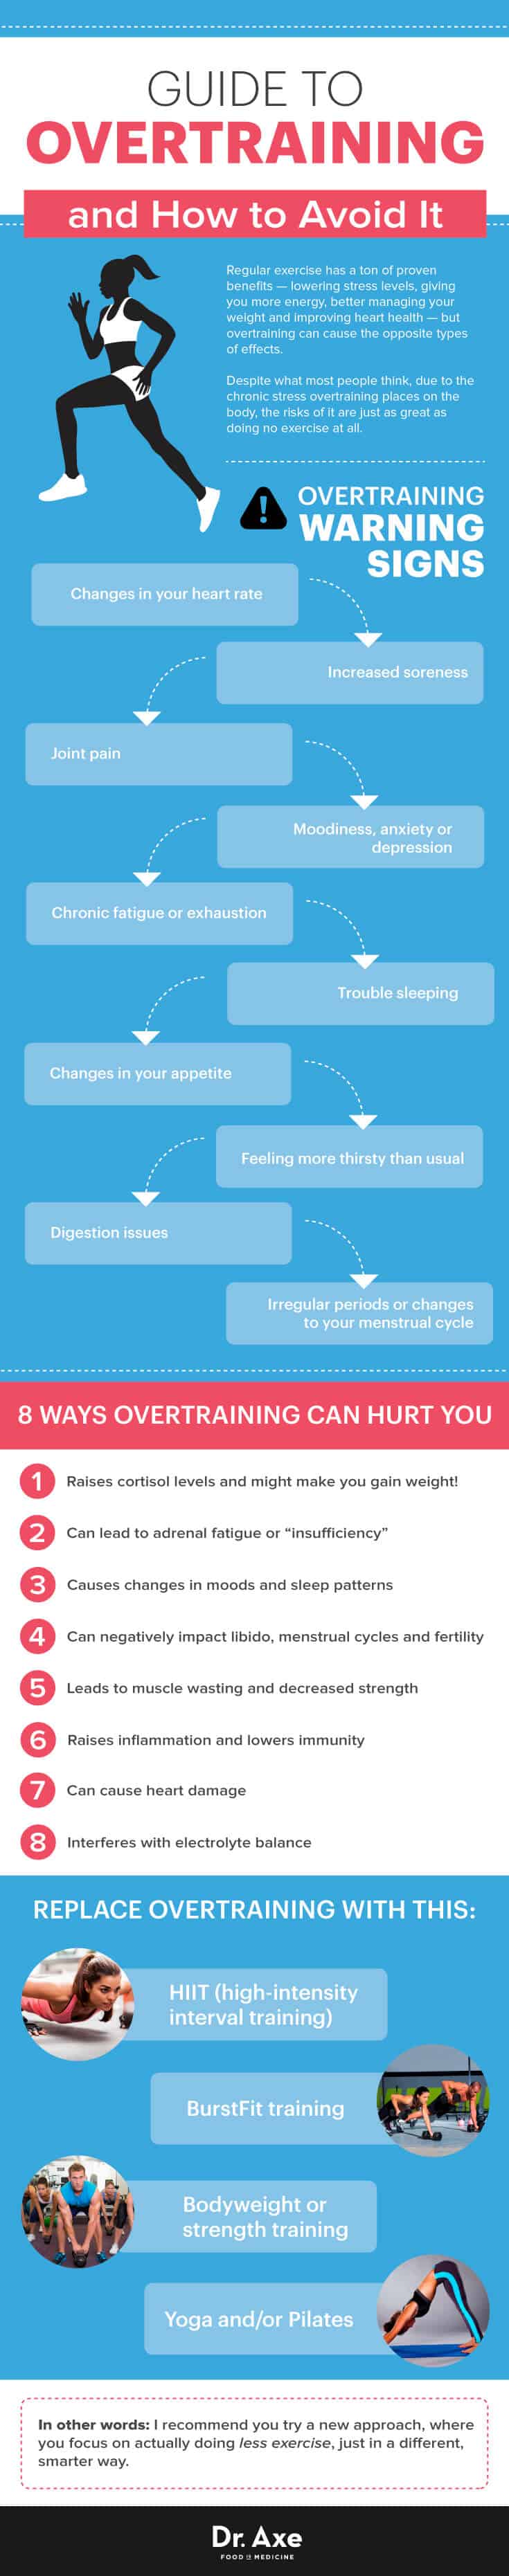 Overtraining infographic - Dr. Axe